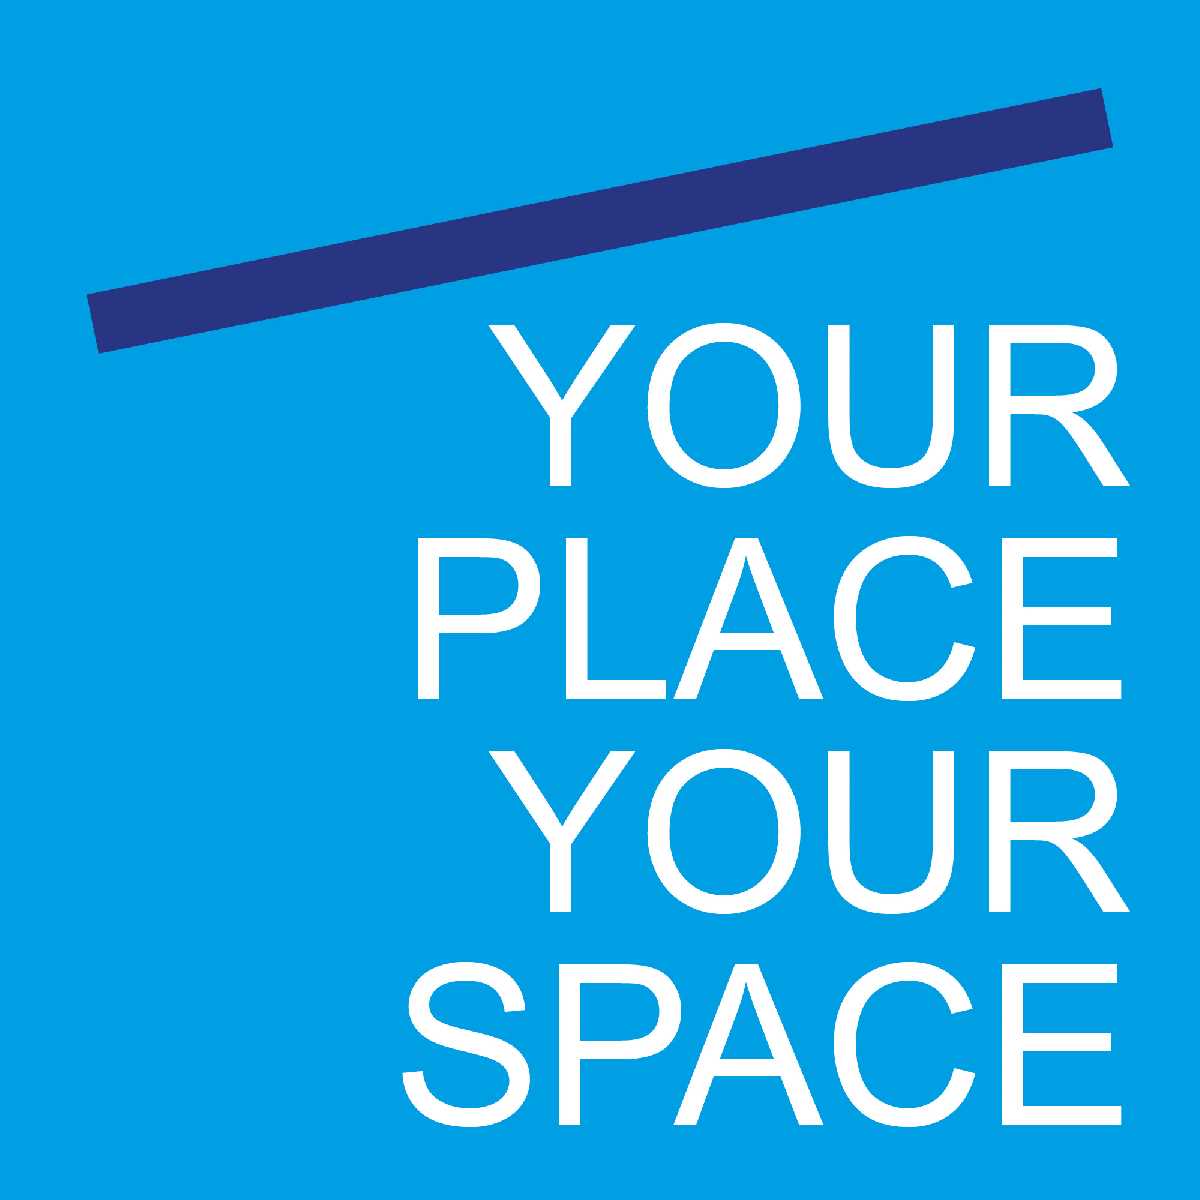 Introducing+Your+Place+Your+Space+-+engaging+people+with+passion+for+their+place